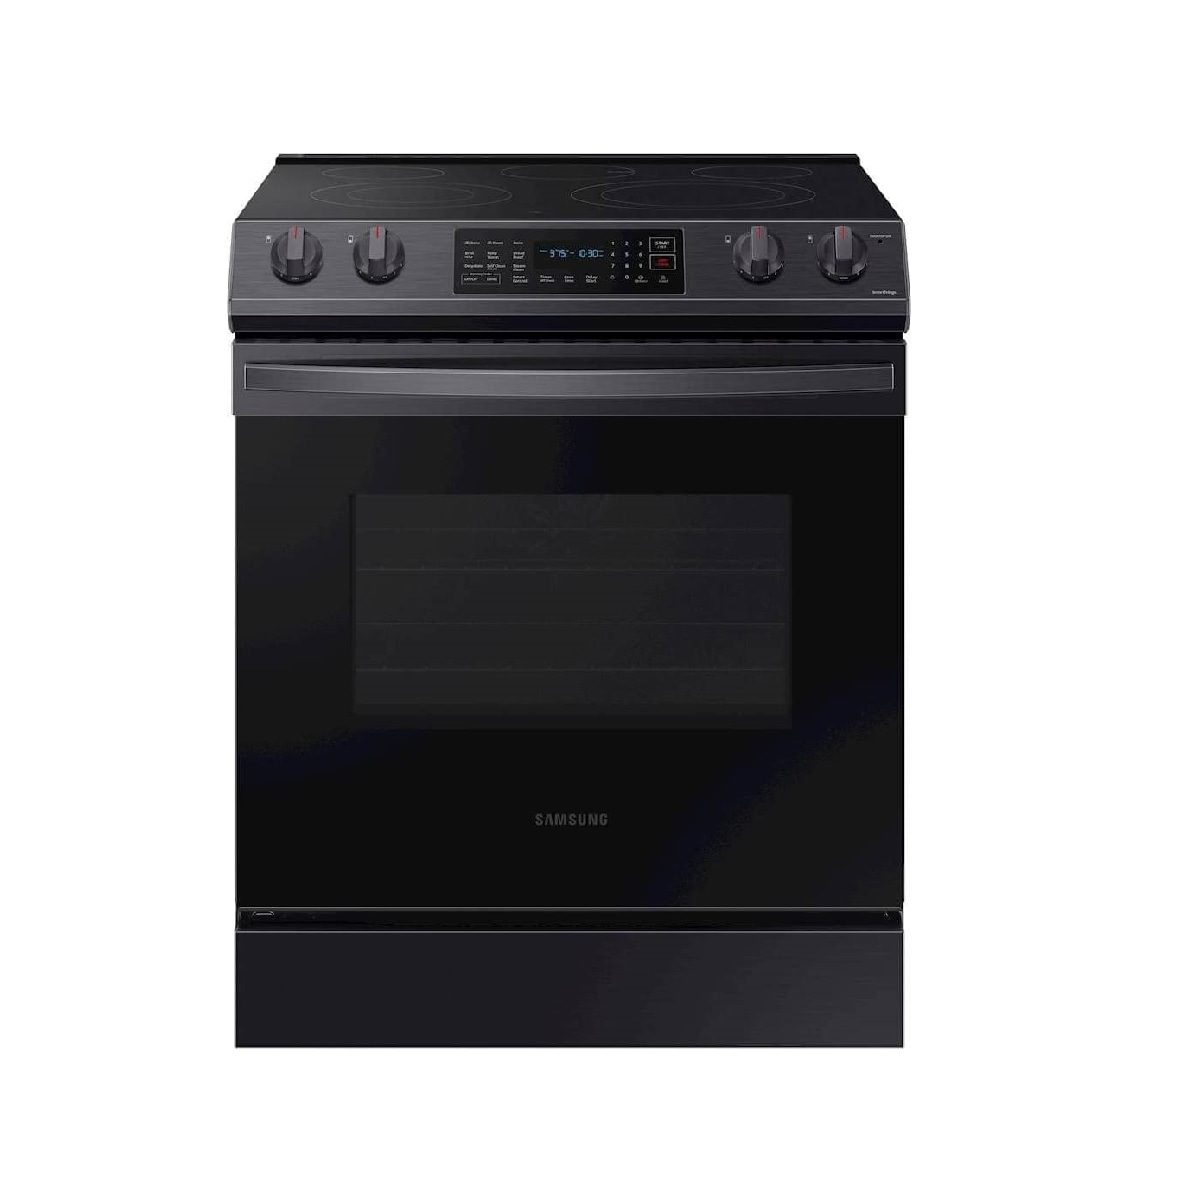 Samsung oven not working but stove top is